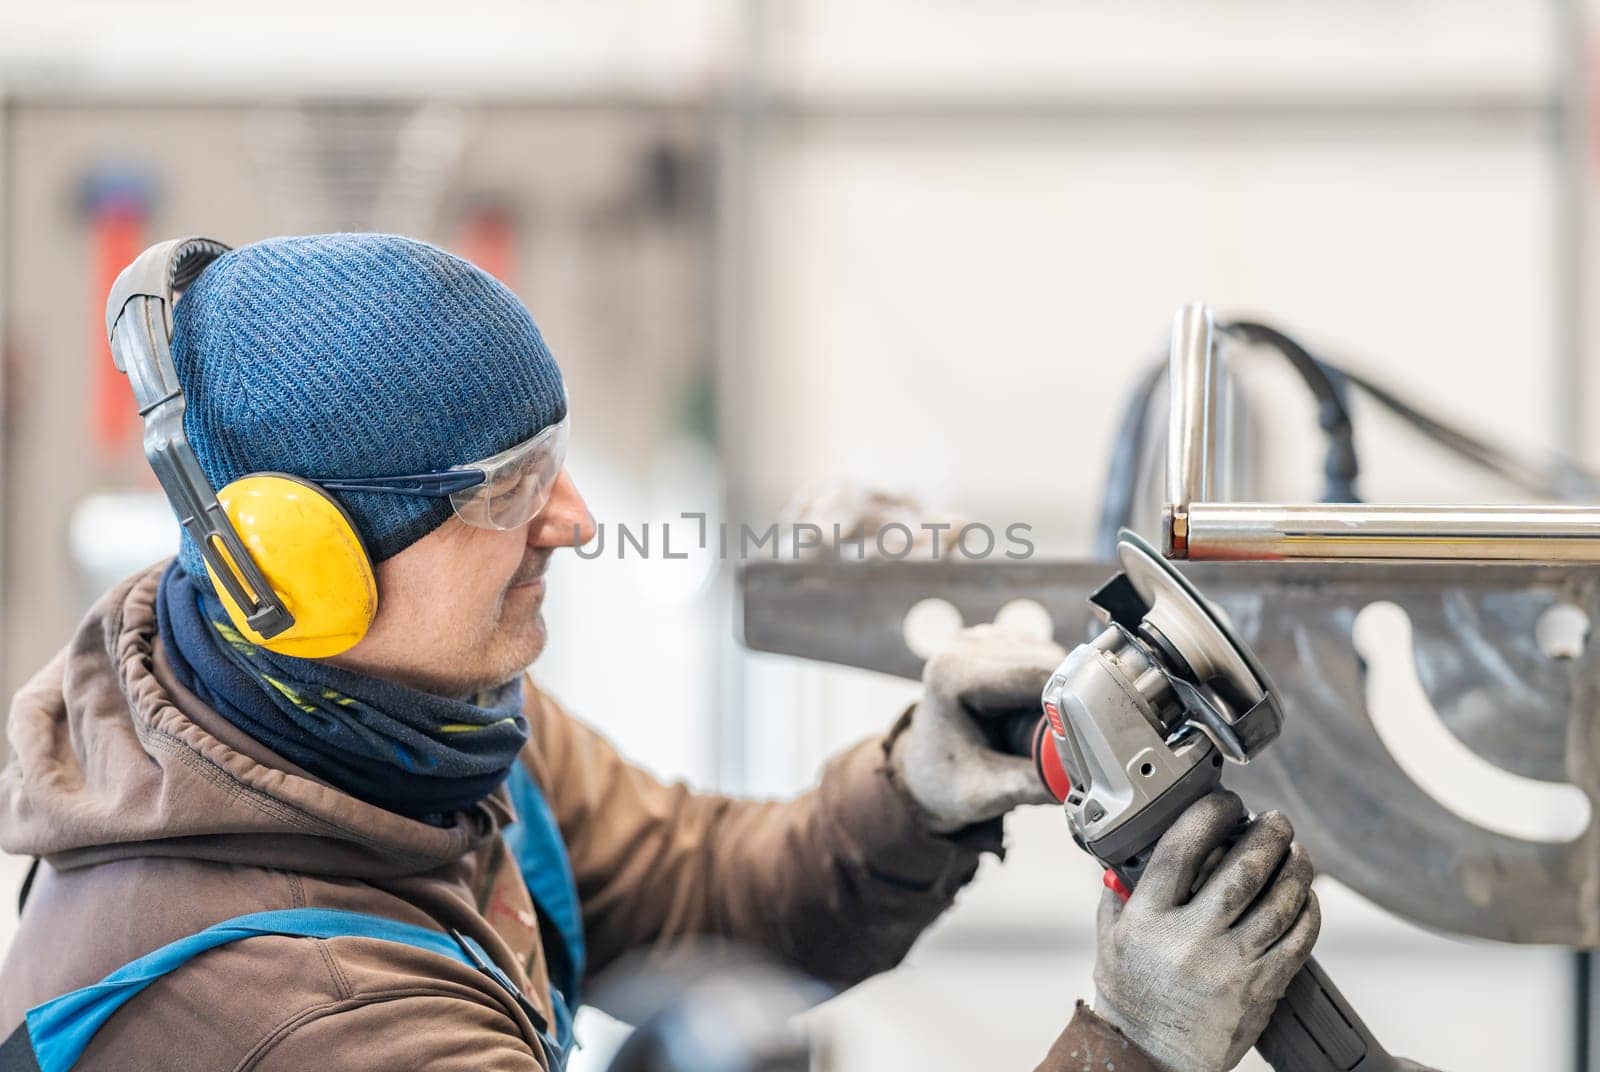 Skilled Worker Grinding Metal with Safety Equipment in Industrial Workshop.